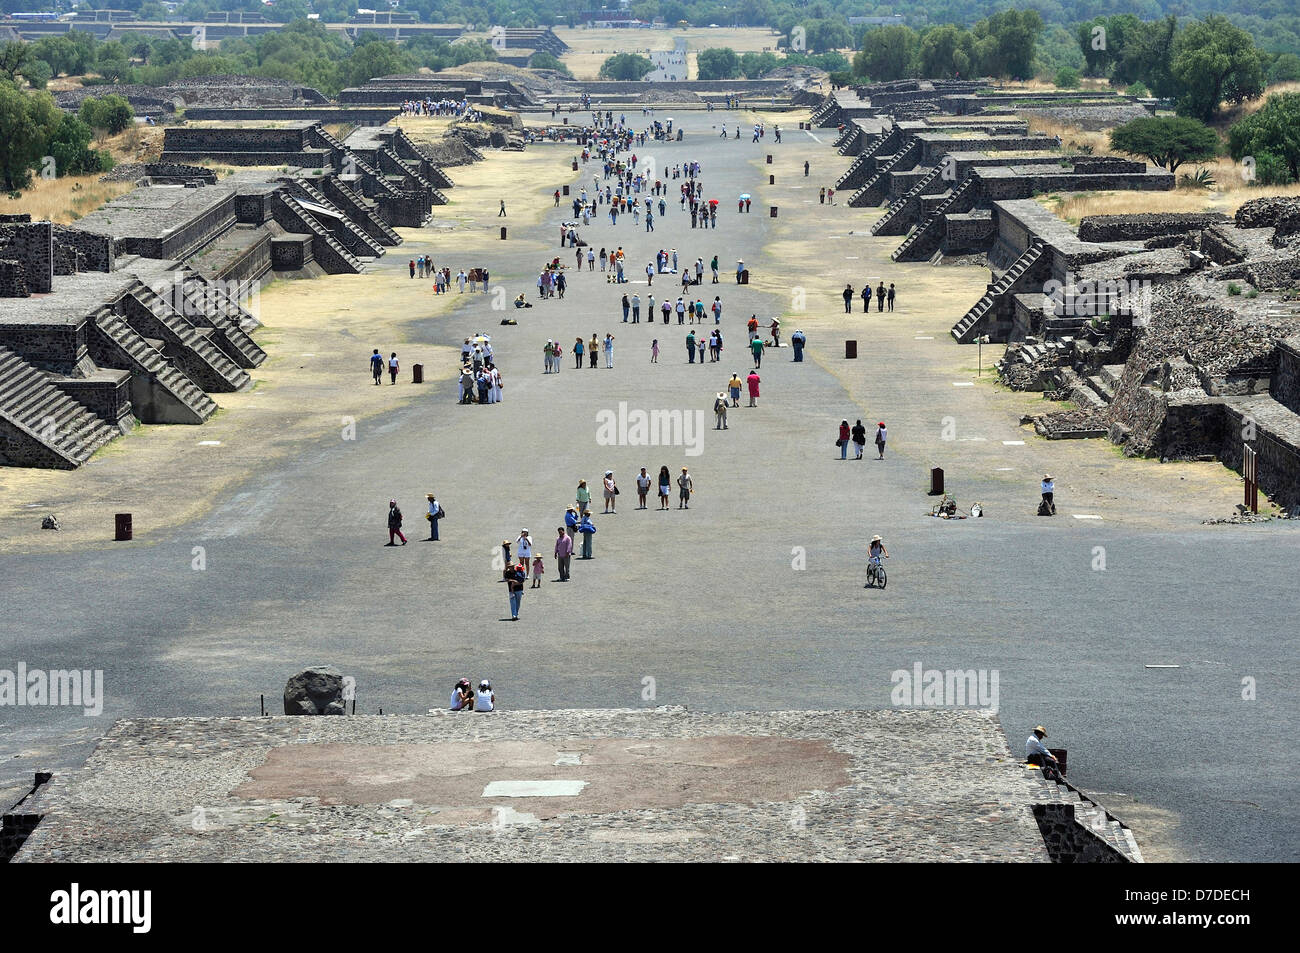 Avenue of the Dead, Teotihuacan, Mexico Stock Photo